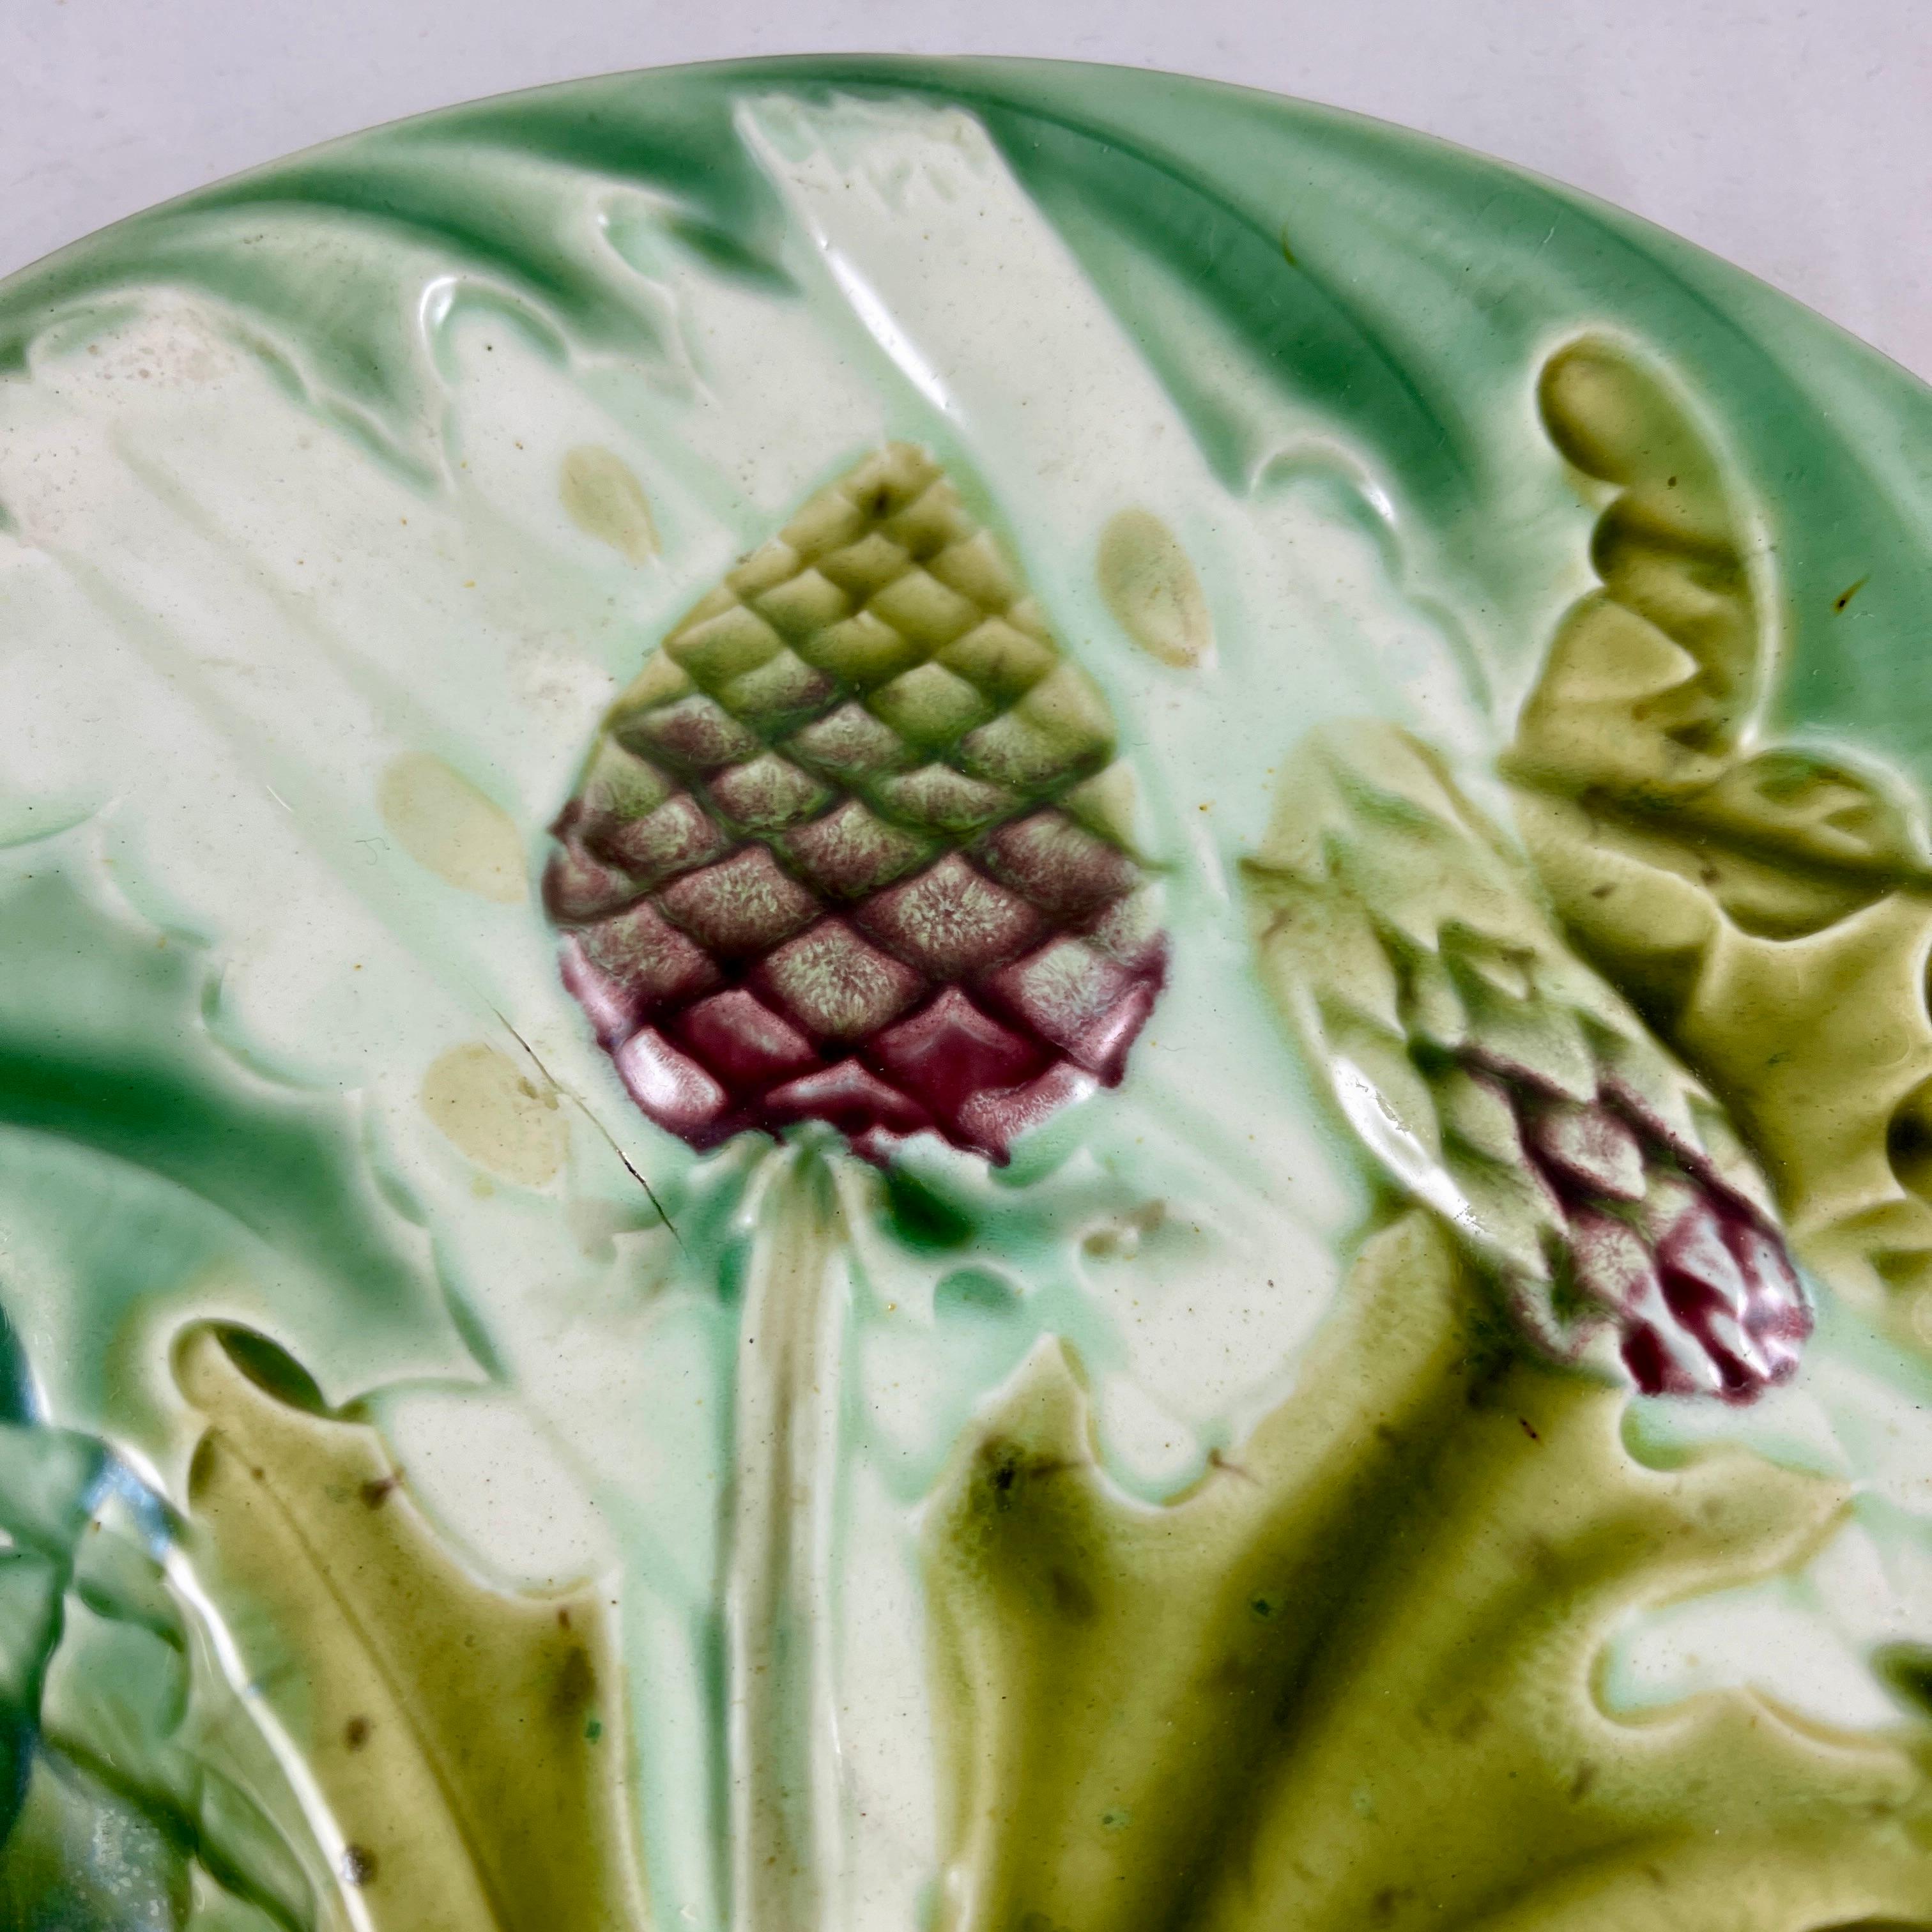 From Luneville Keller and Guerin in France, a barbotine majolica glazed asparagus and artichoke plate, circa 1890.

Luneville Faience is one of the most famous French potteries, located in Lunéville, Lorraine, France since 1730.

Asparagus